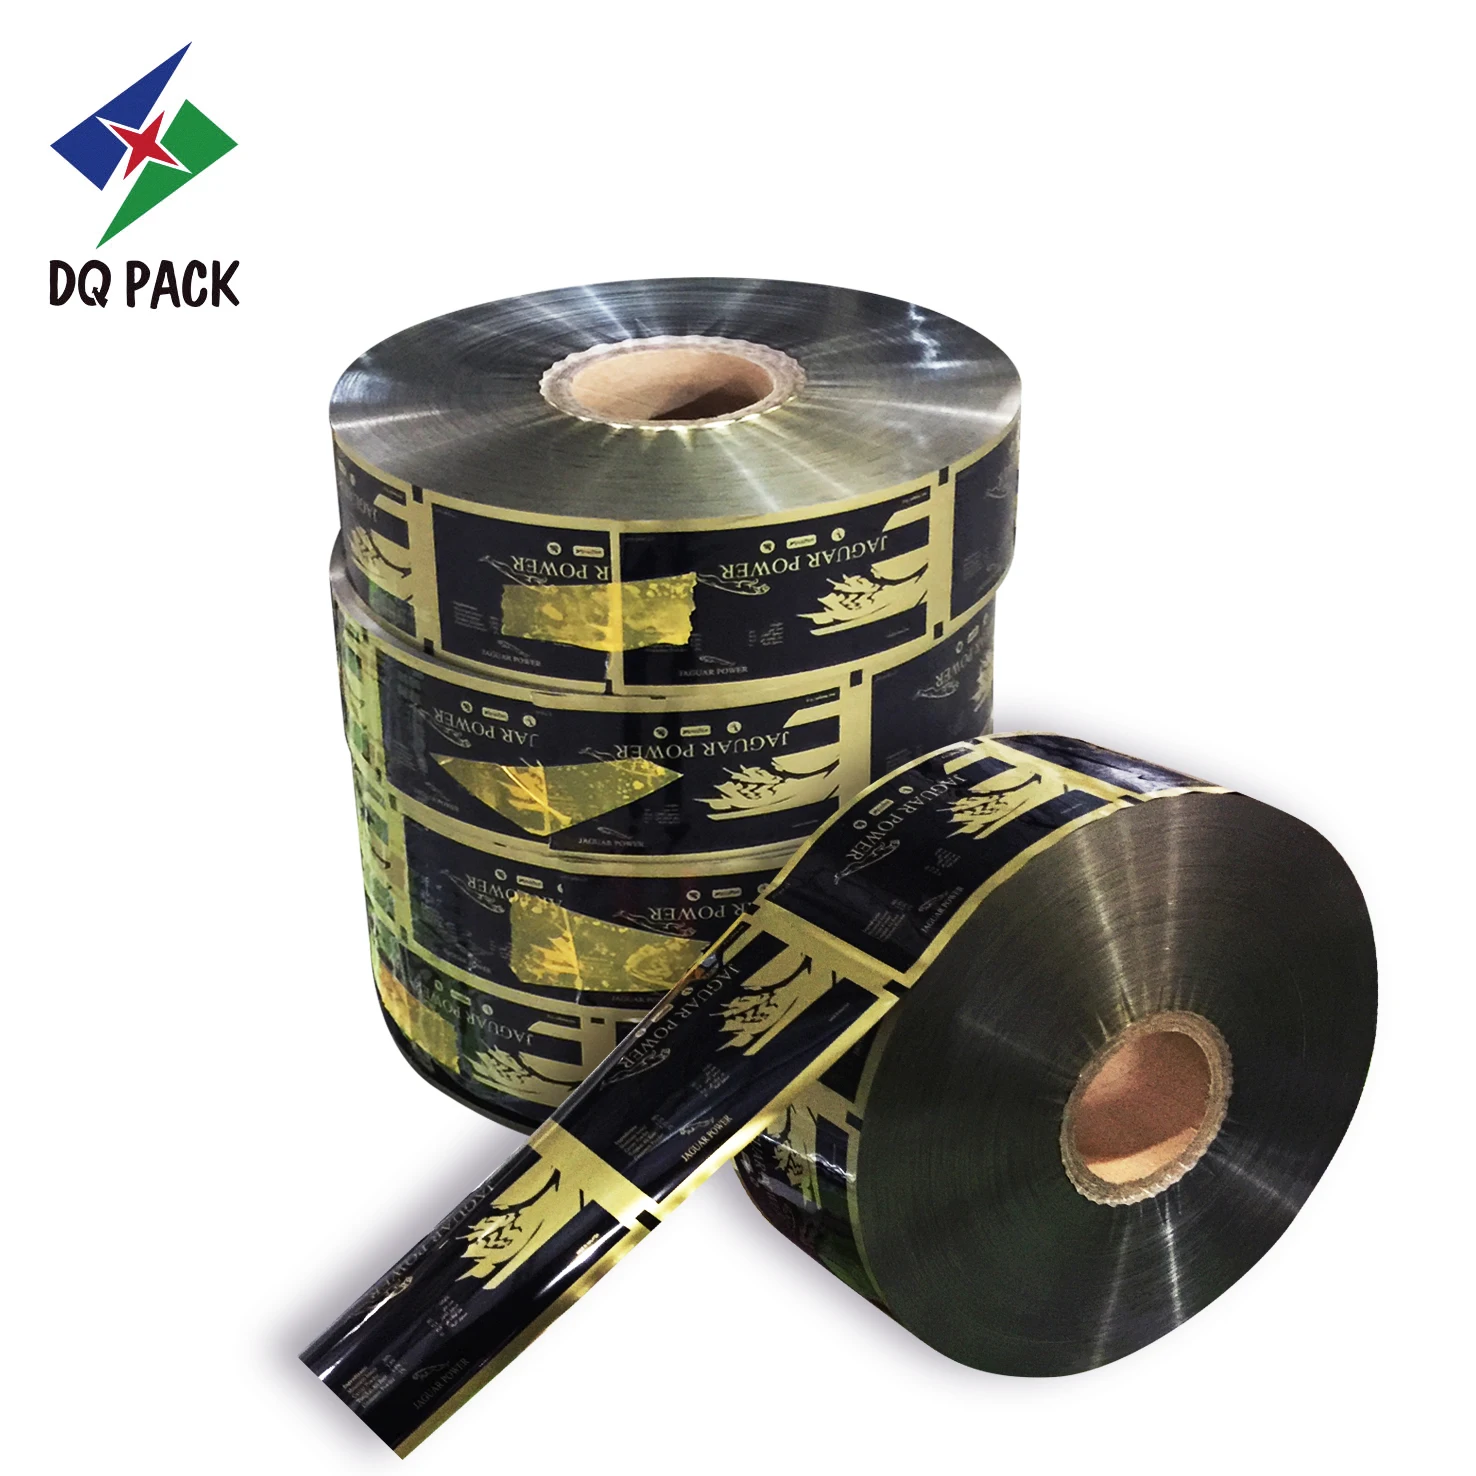 China DQ PACK flexible packaging PVC Shrink label